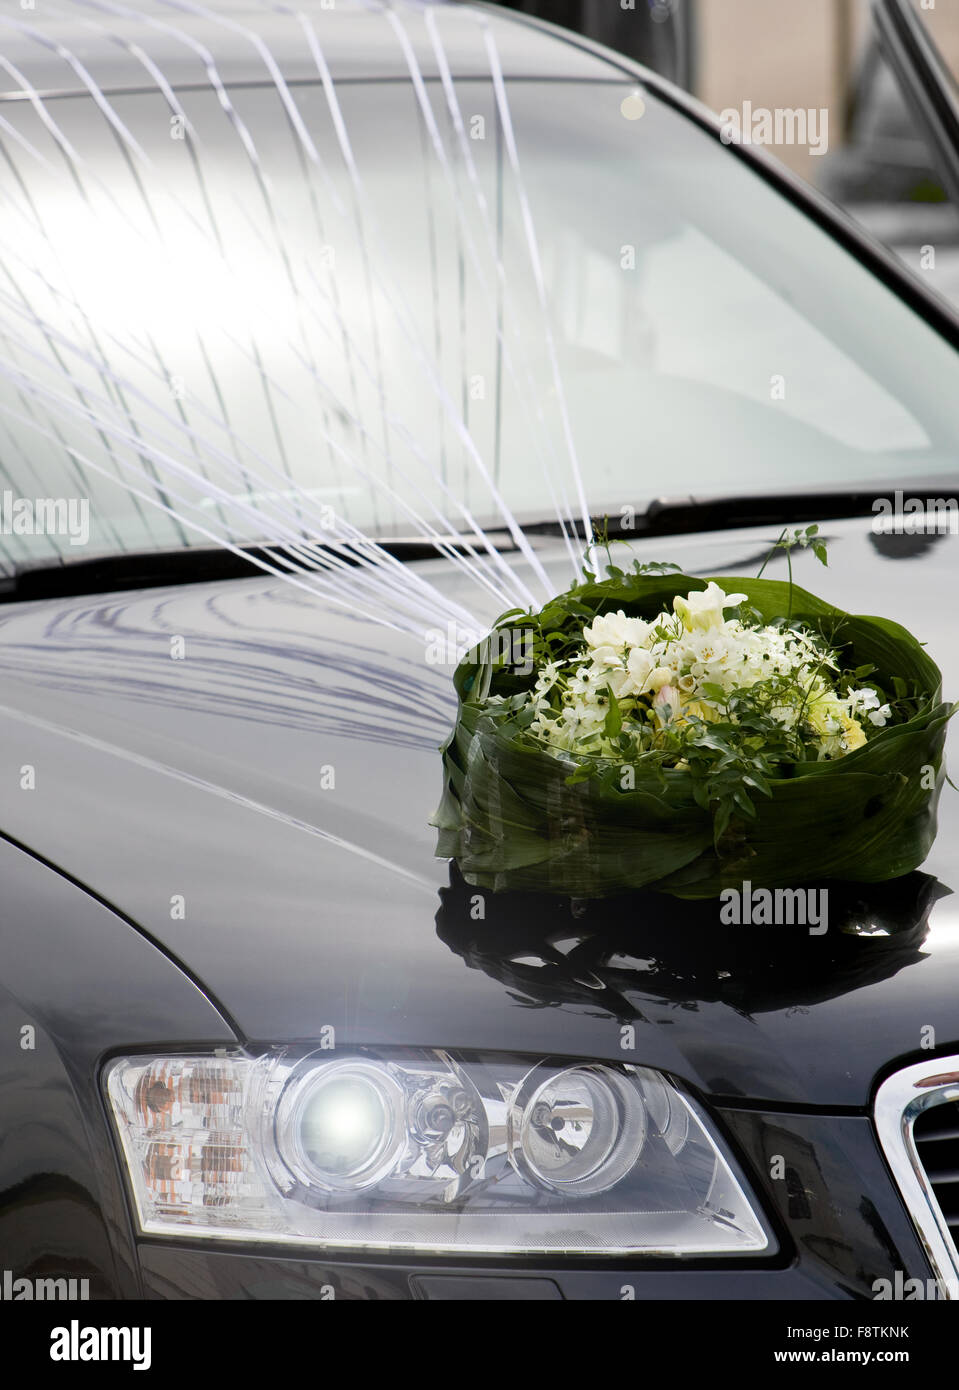 Wedding car decoration on the current tradition Stock Photo - Alamy